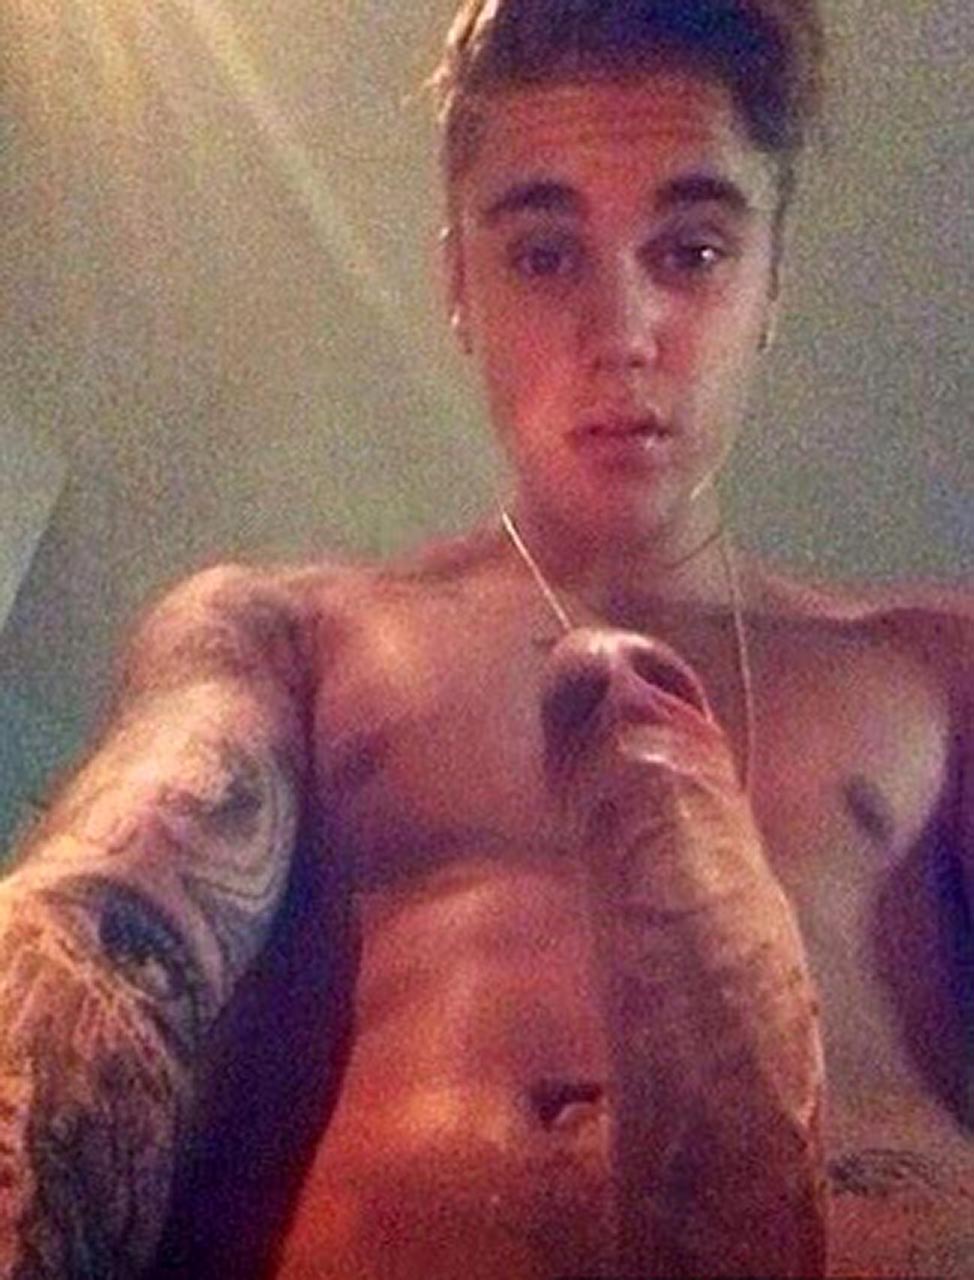 Best of Justin leaked nudes